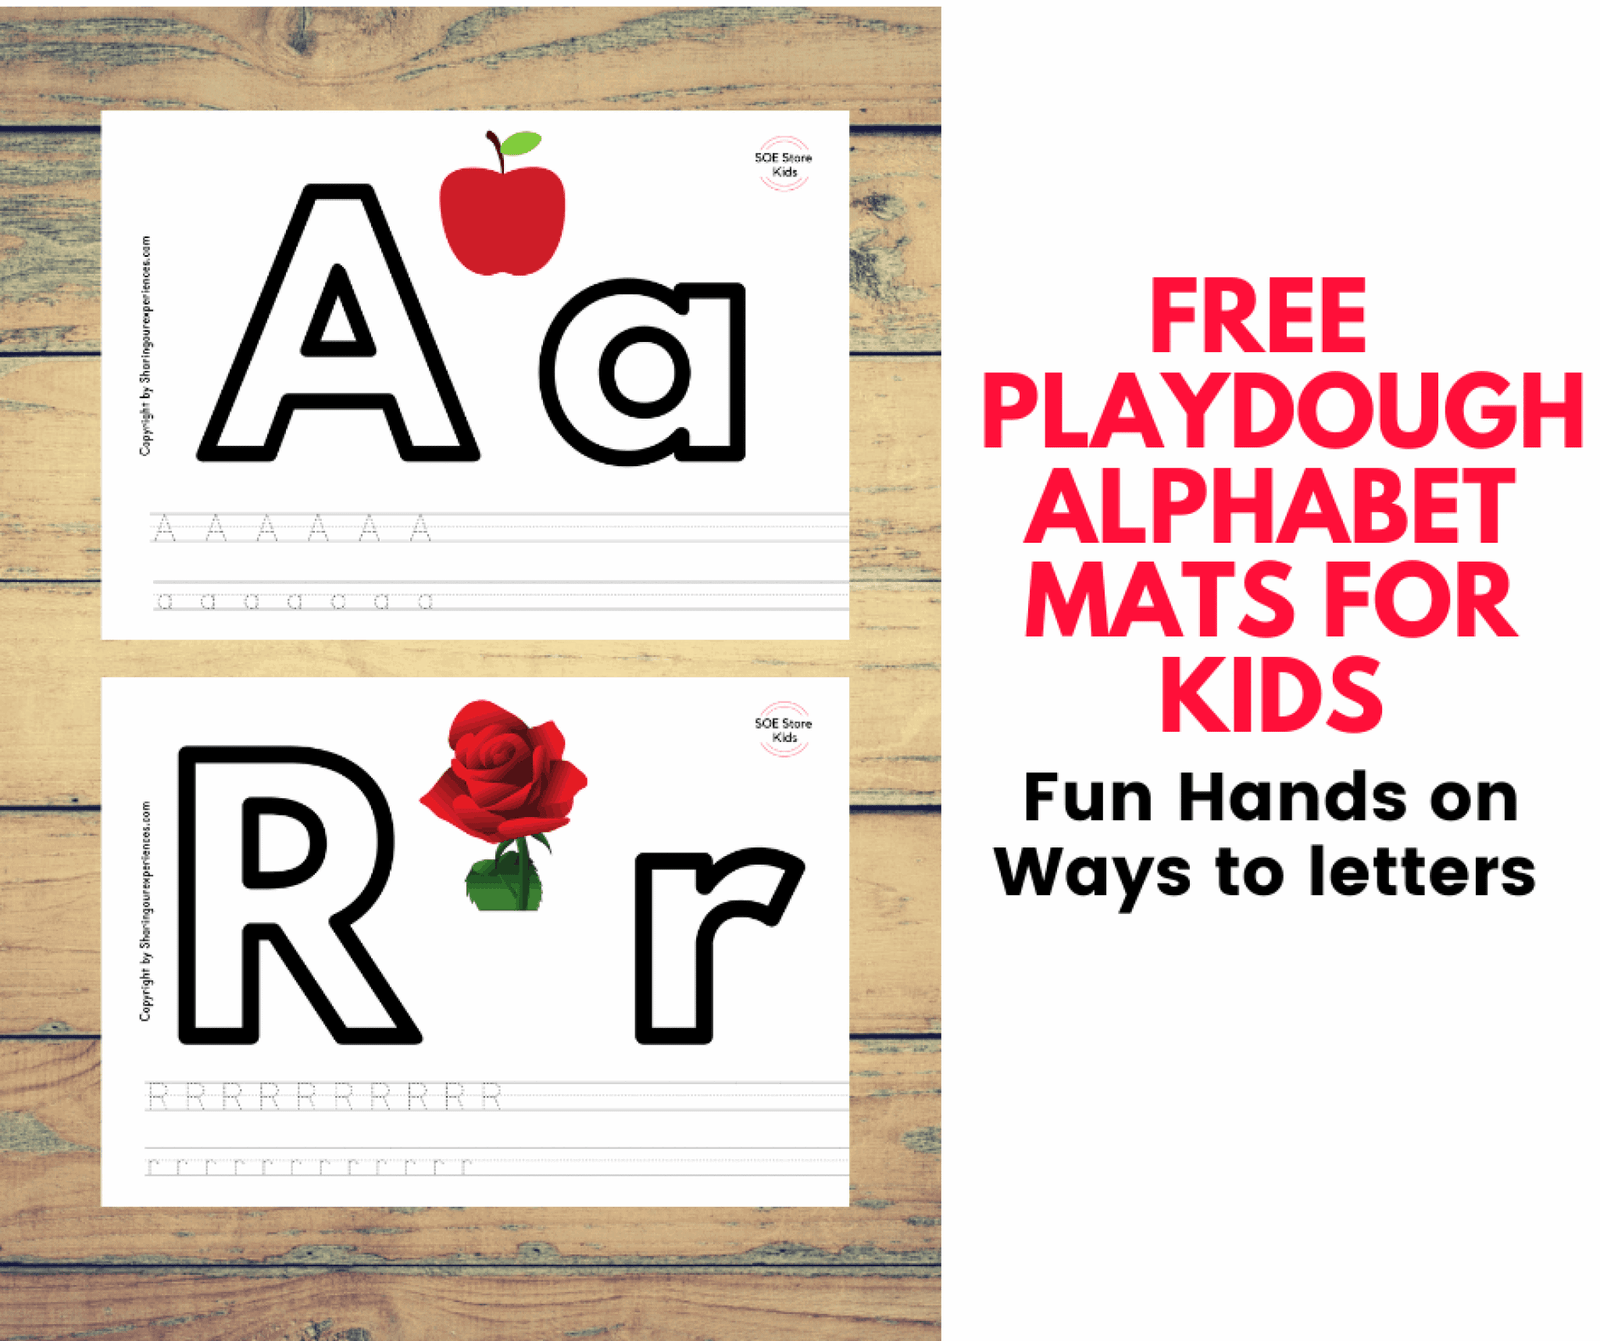 Alphabet Playdough Mats Free Printable Pdf Fun Way To Learning Letters